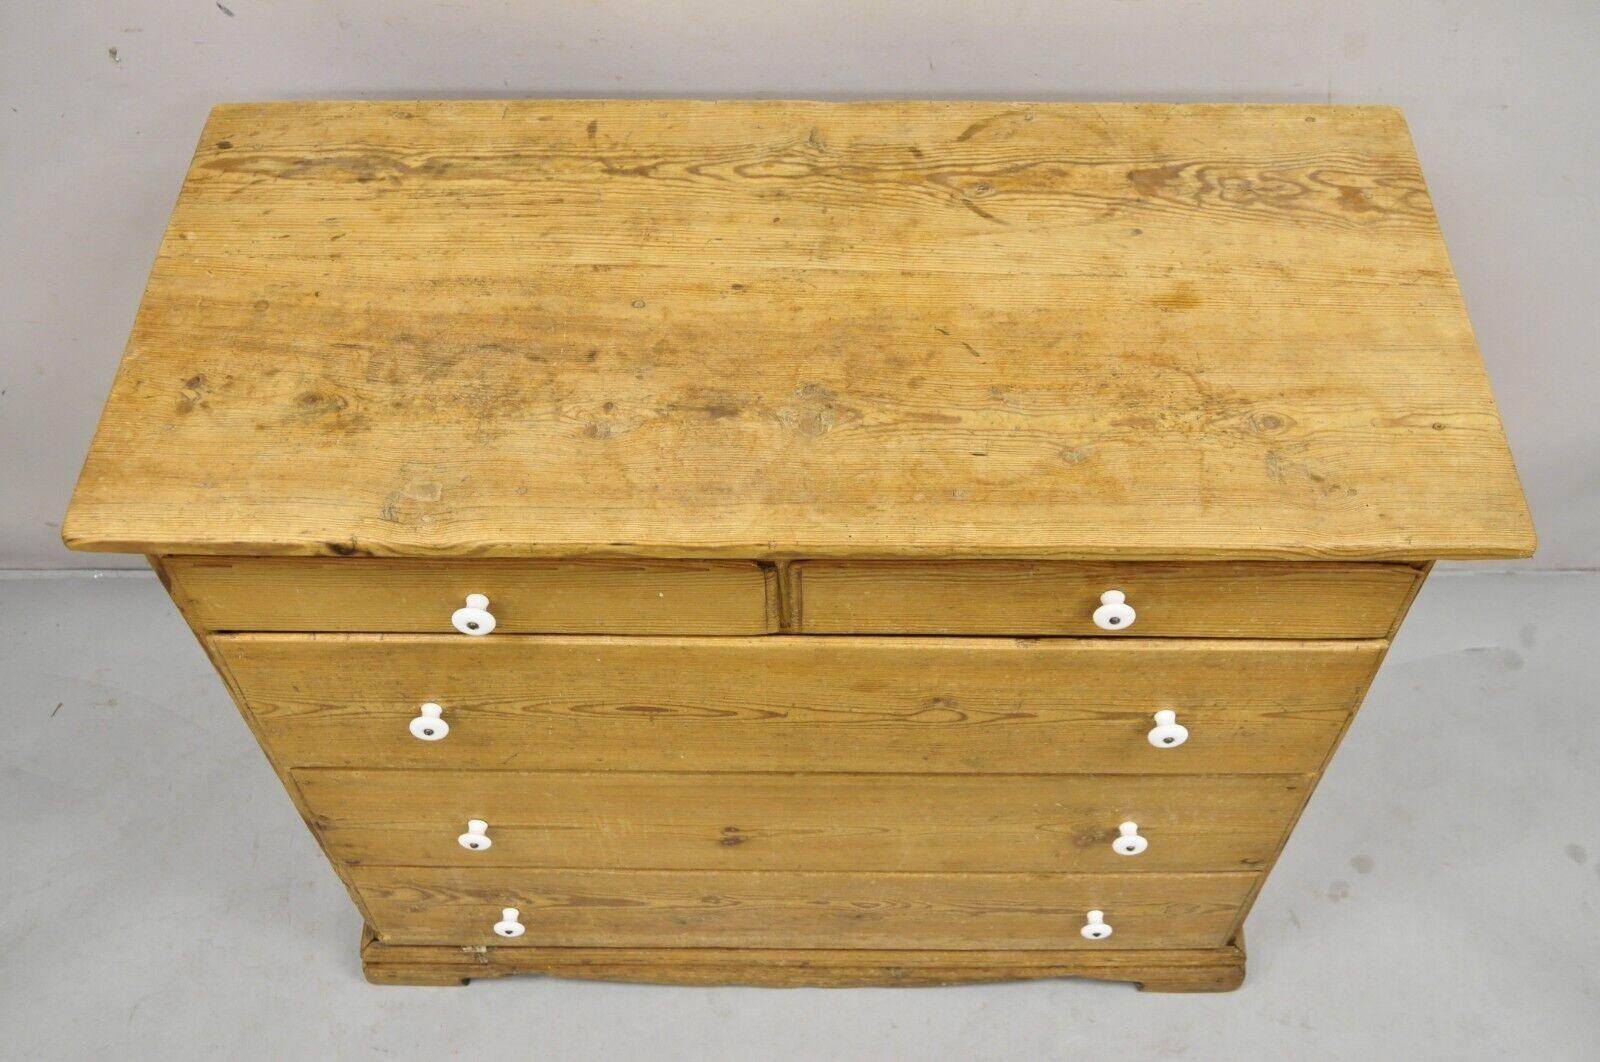 French Provincial Antique 5 Drawer French Country Farmhouse Primitive Pine Dresser Chest of Drawer